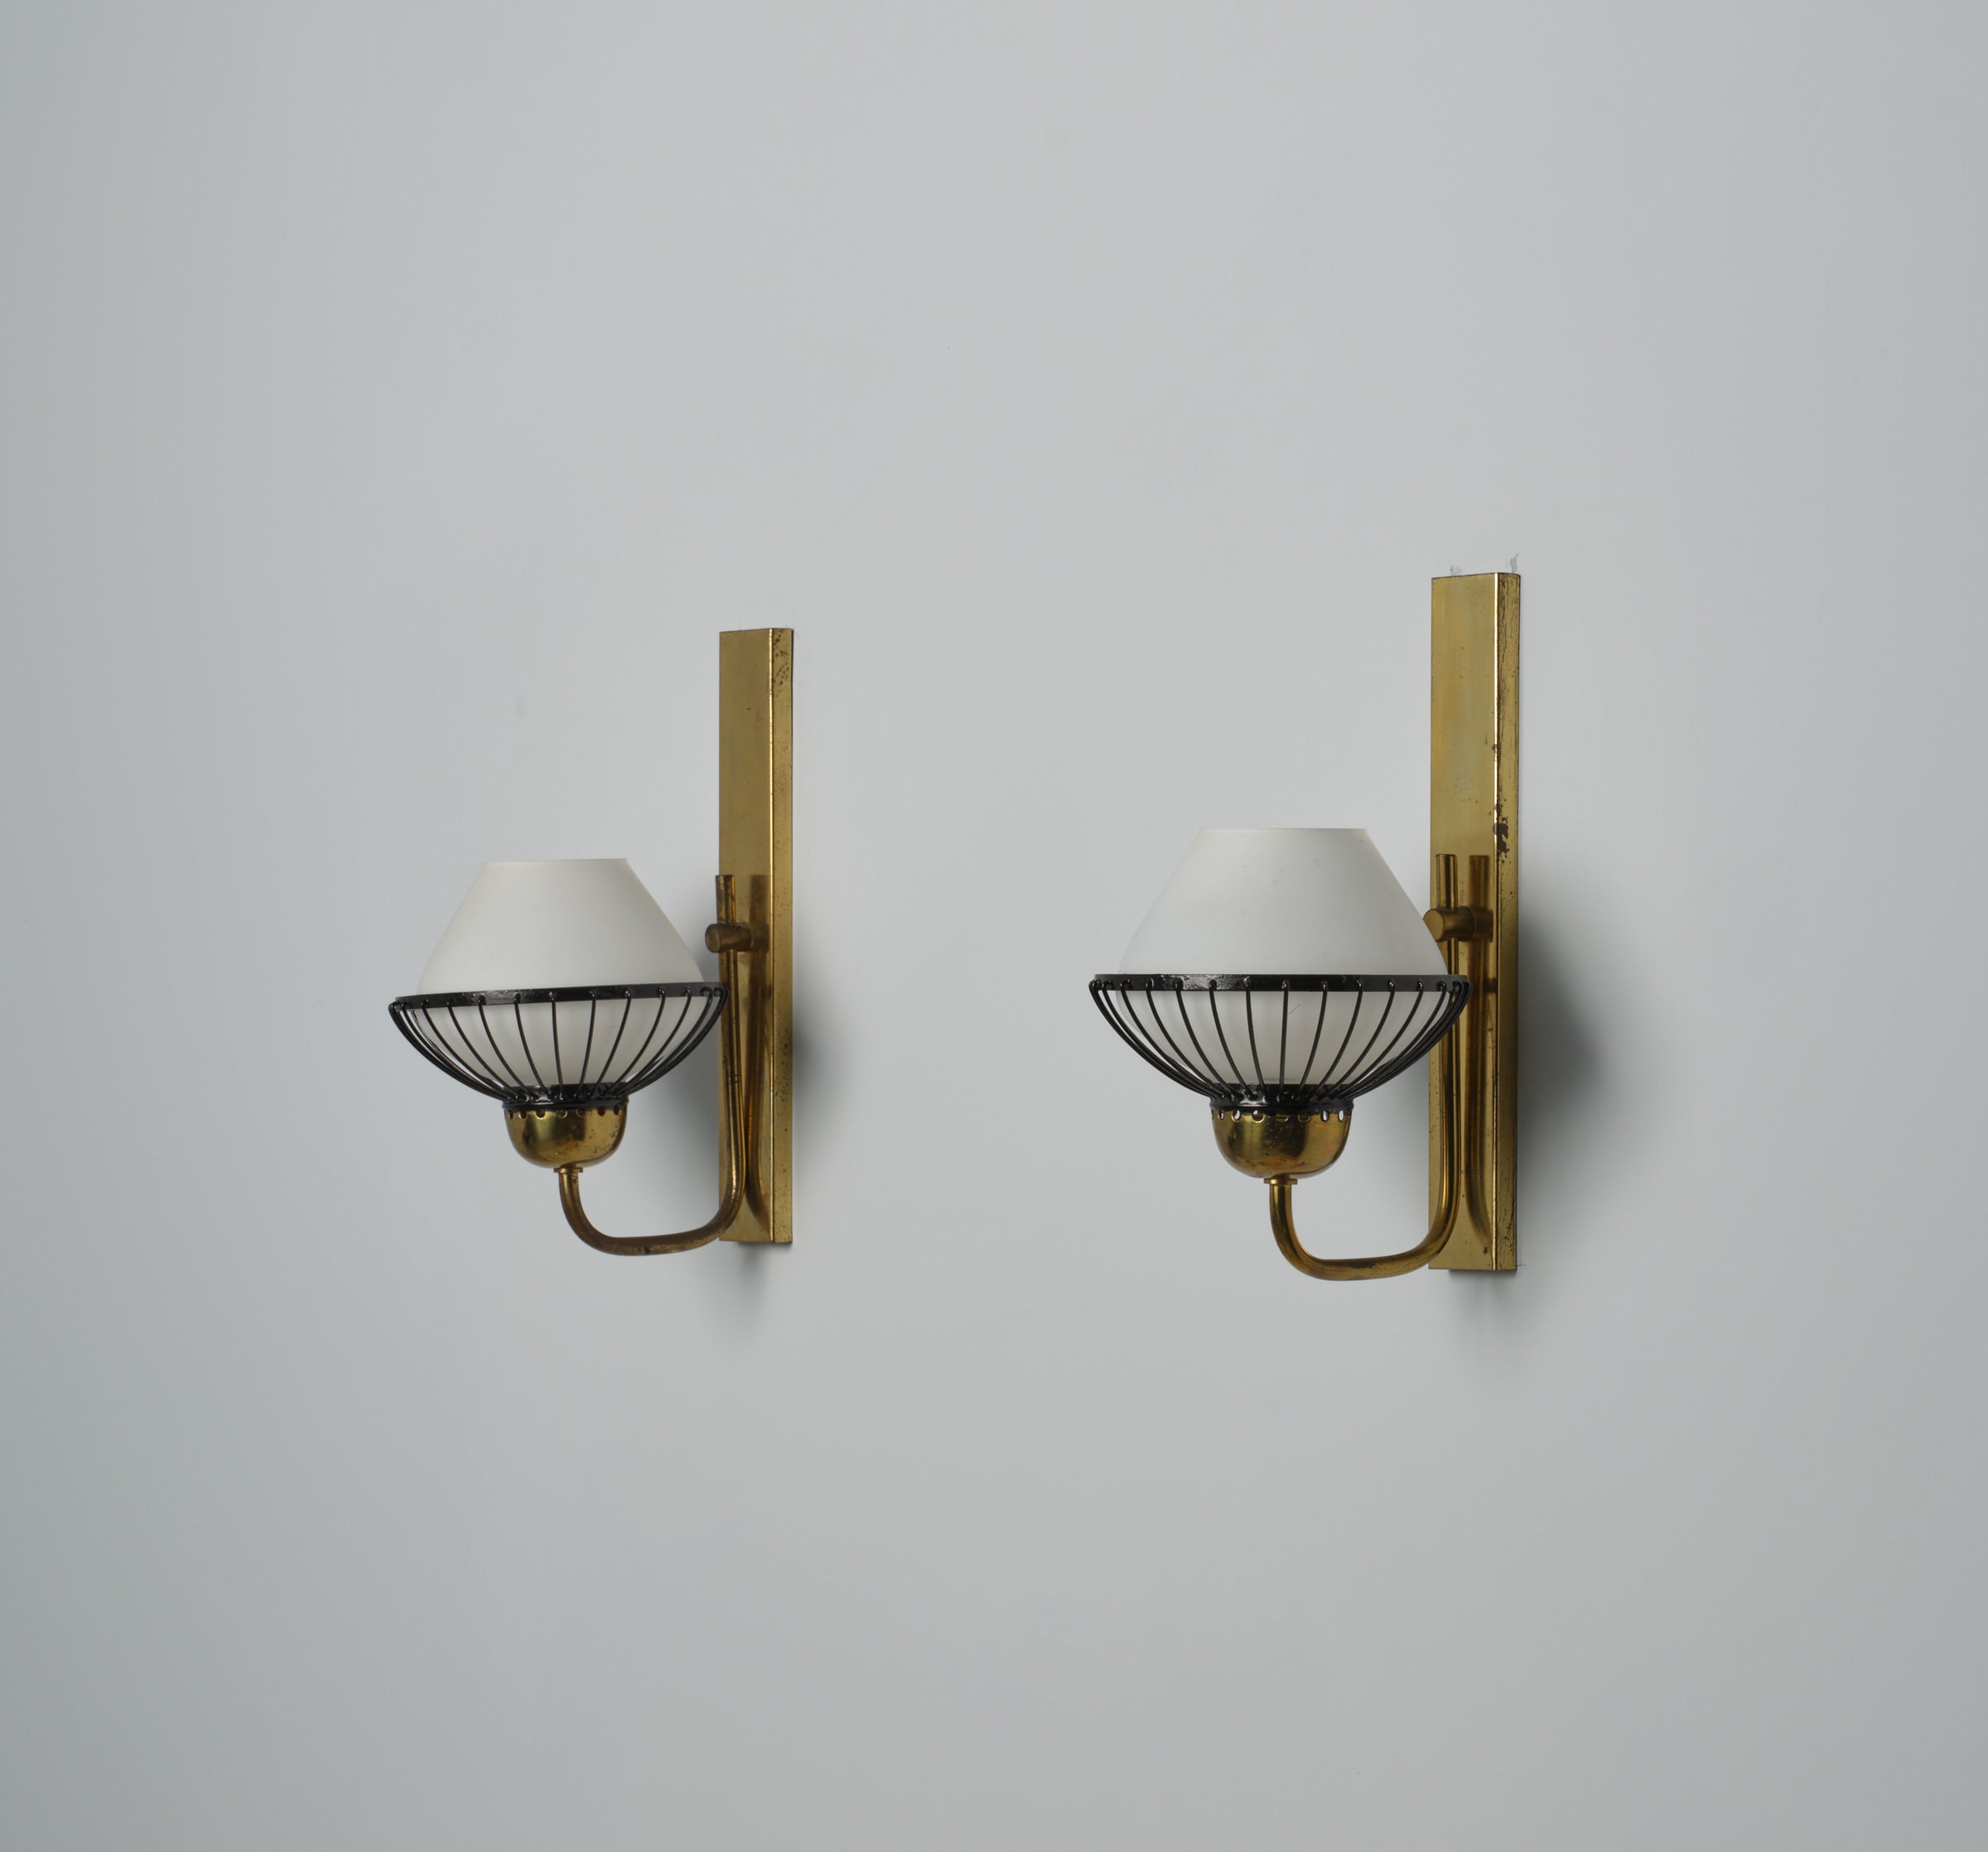 Pair of midcentury Italian wall lamps, known as appliques. Crafted in the 1950s, these pieces exude sophistication and refinement. Each lamp is meticulously fashioned from brass, featuring accents of black metal and opal glass lampshades. Despite